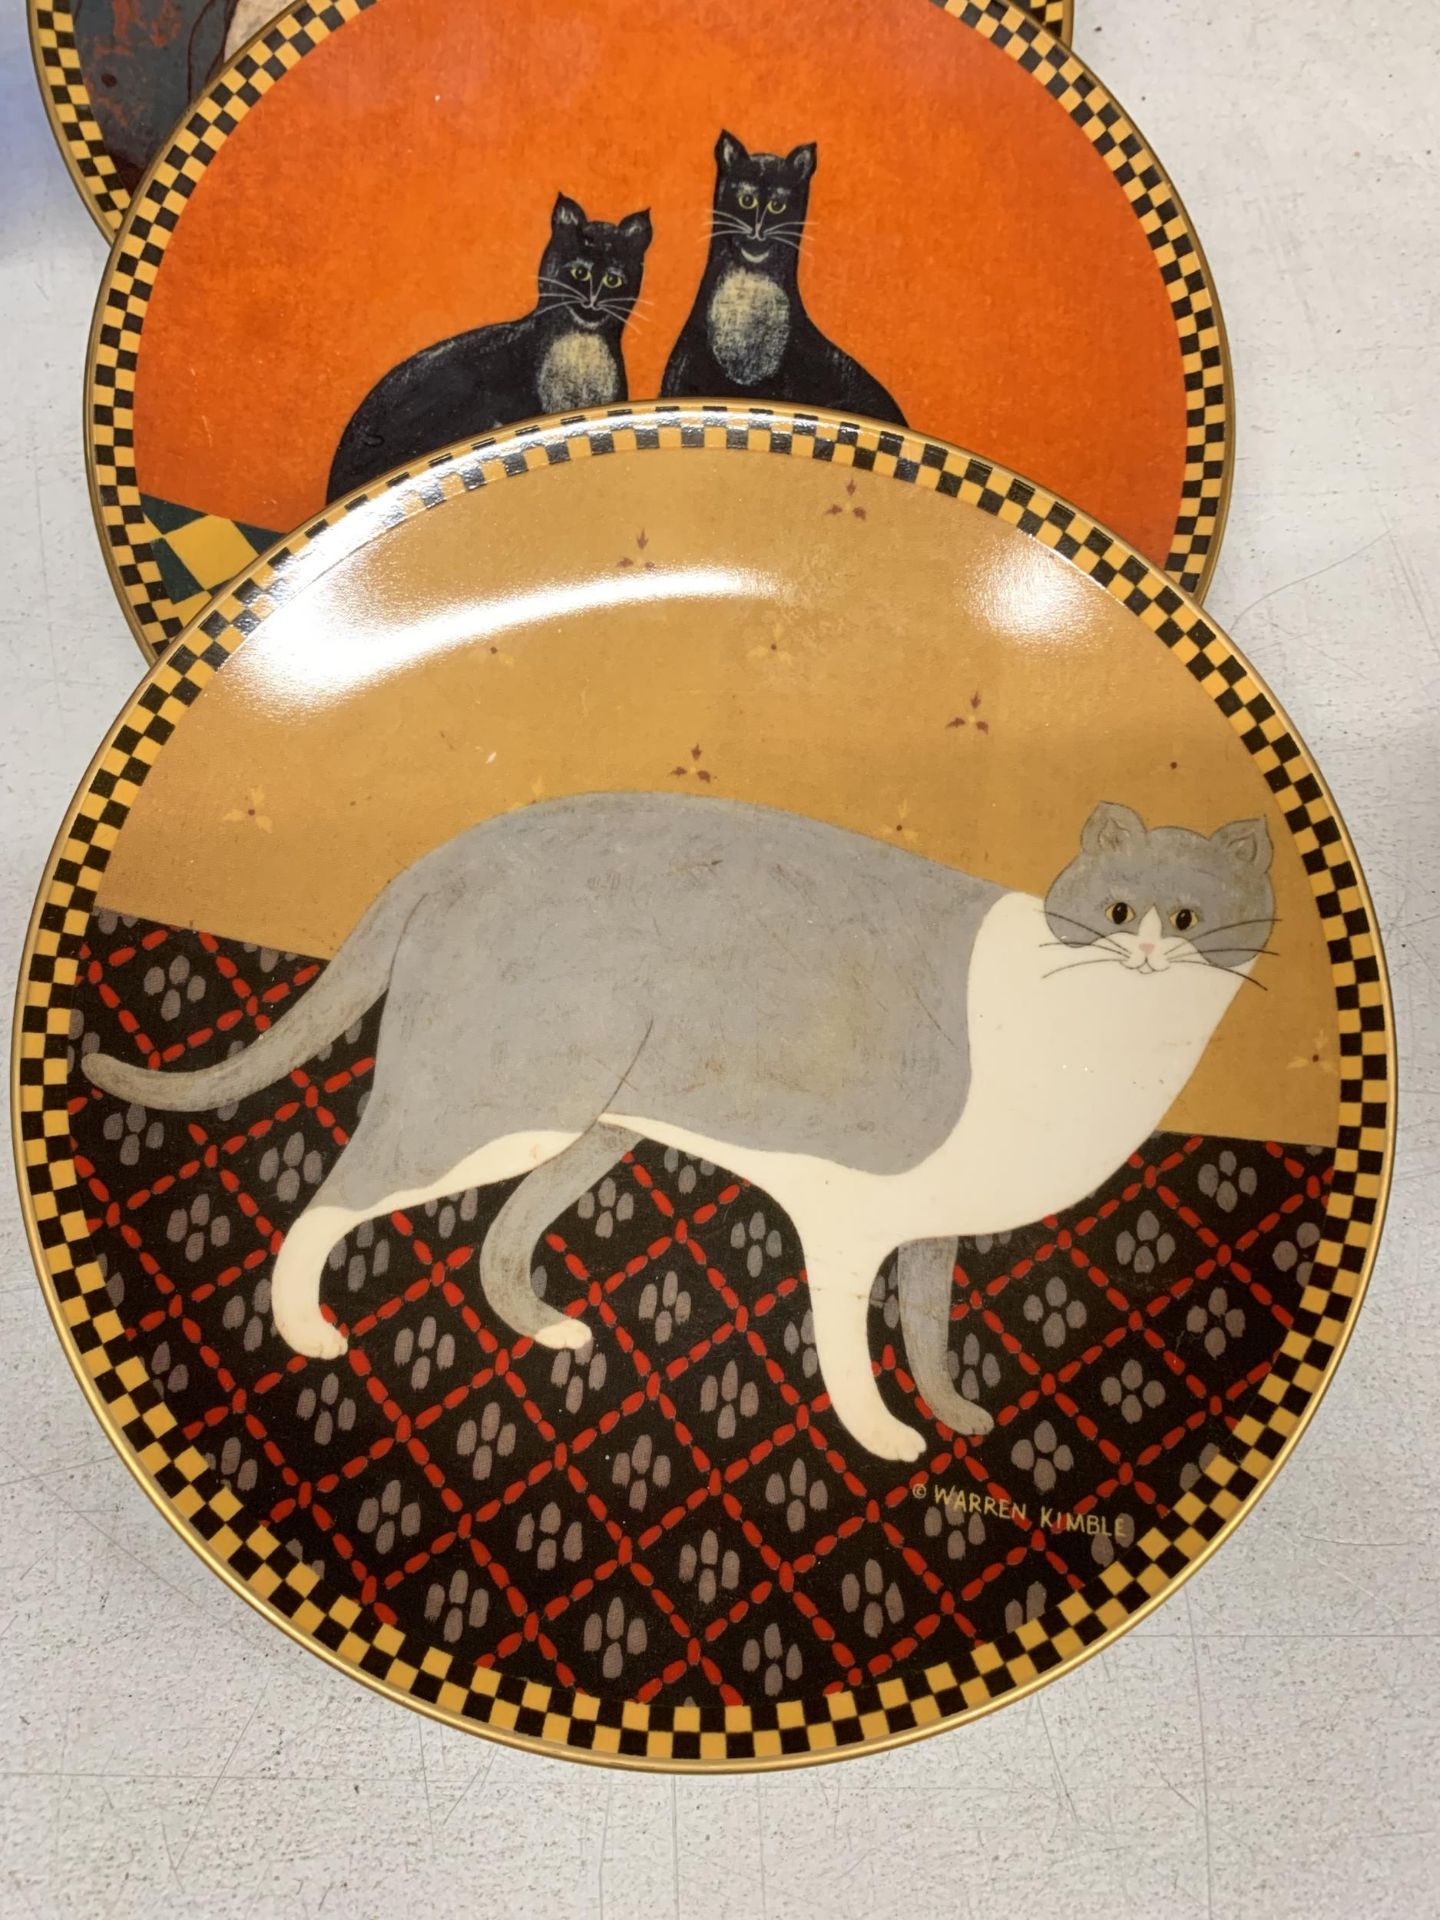 A QUANTITY OF CAT CABINET/WALL PLATES IN THE 'PROPER CATS' COLLECTION BY WARREN KIMBLE - 5 IN TOTAL - Image 2 of 3